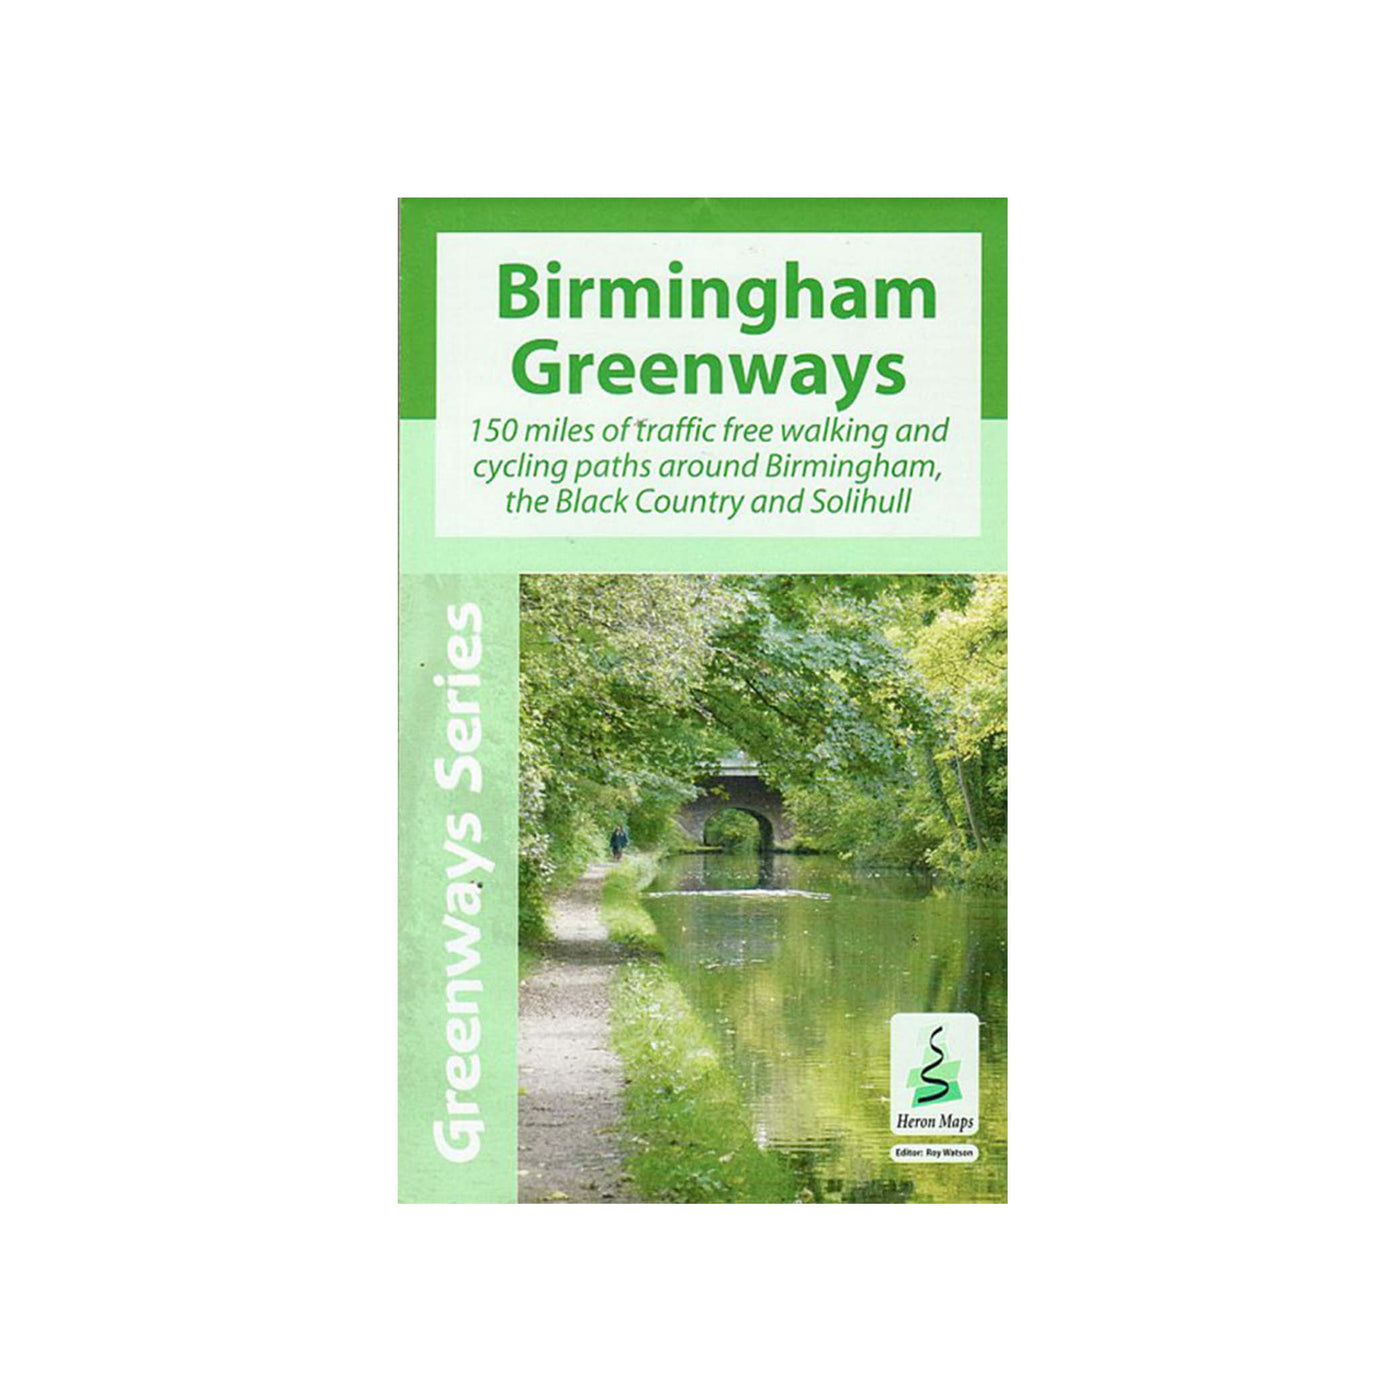 Birmingham Greenways map. 150 miles of traffic free walking and cycling paths around Birmingham, the Black Country and Solihull. 